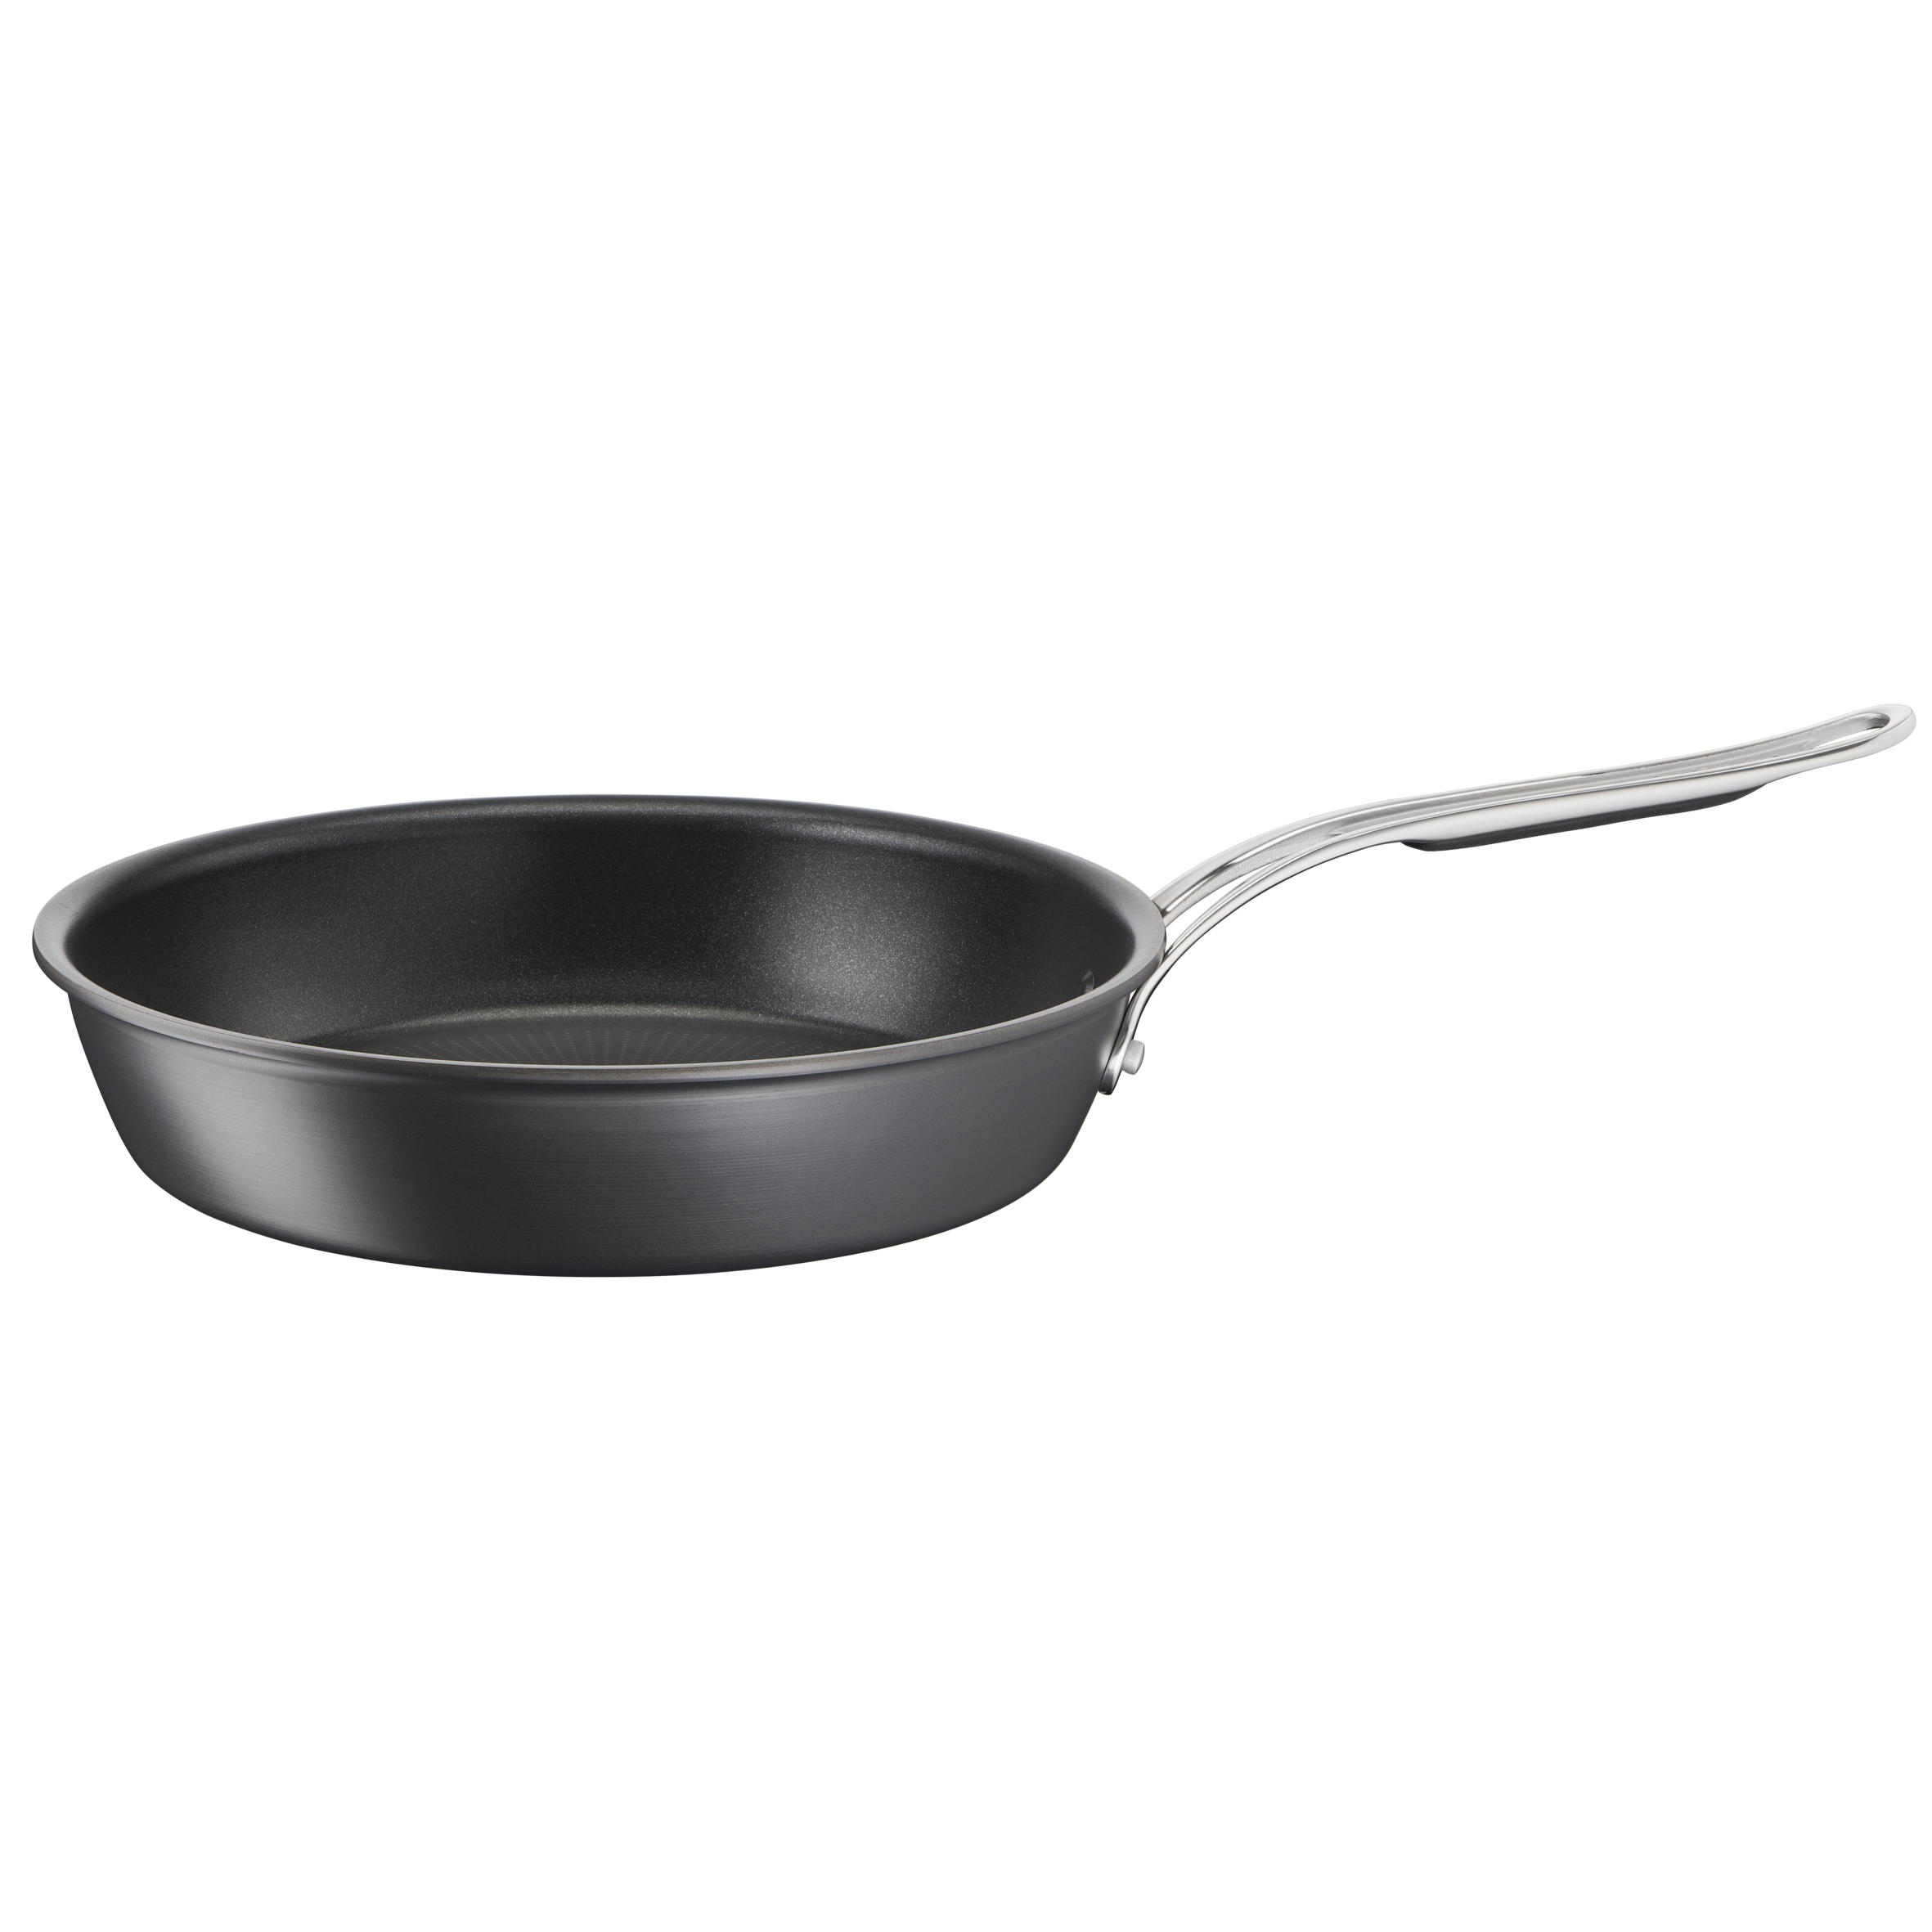 Jamie Oliver by Tefal Cooks Classic Non-Stick Induction Hard Anodised Frypan 30cm